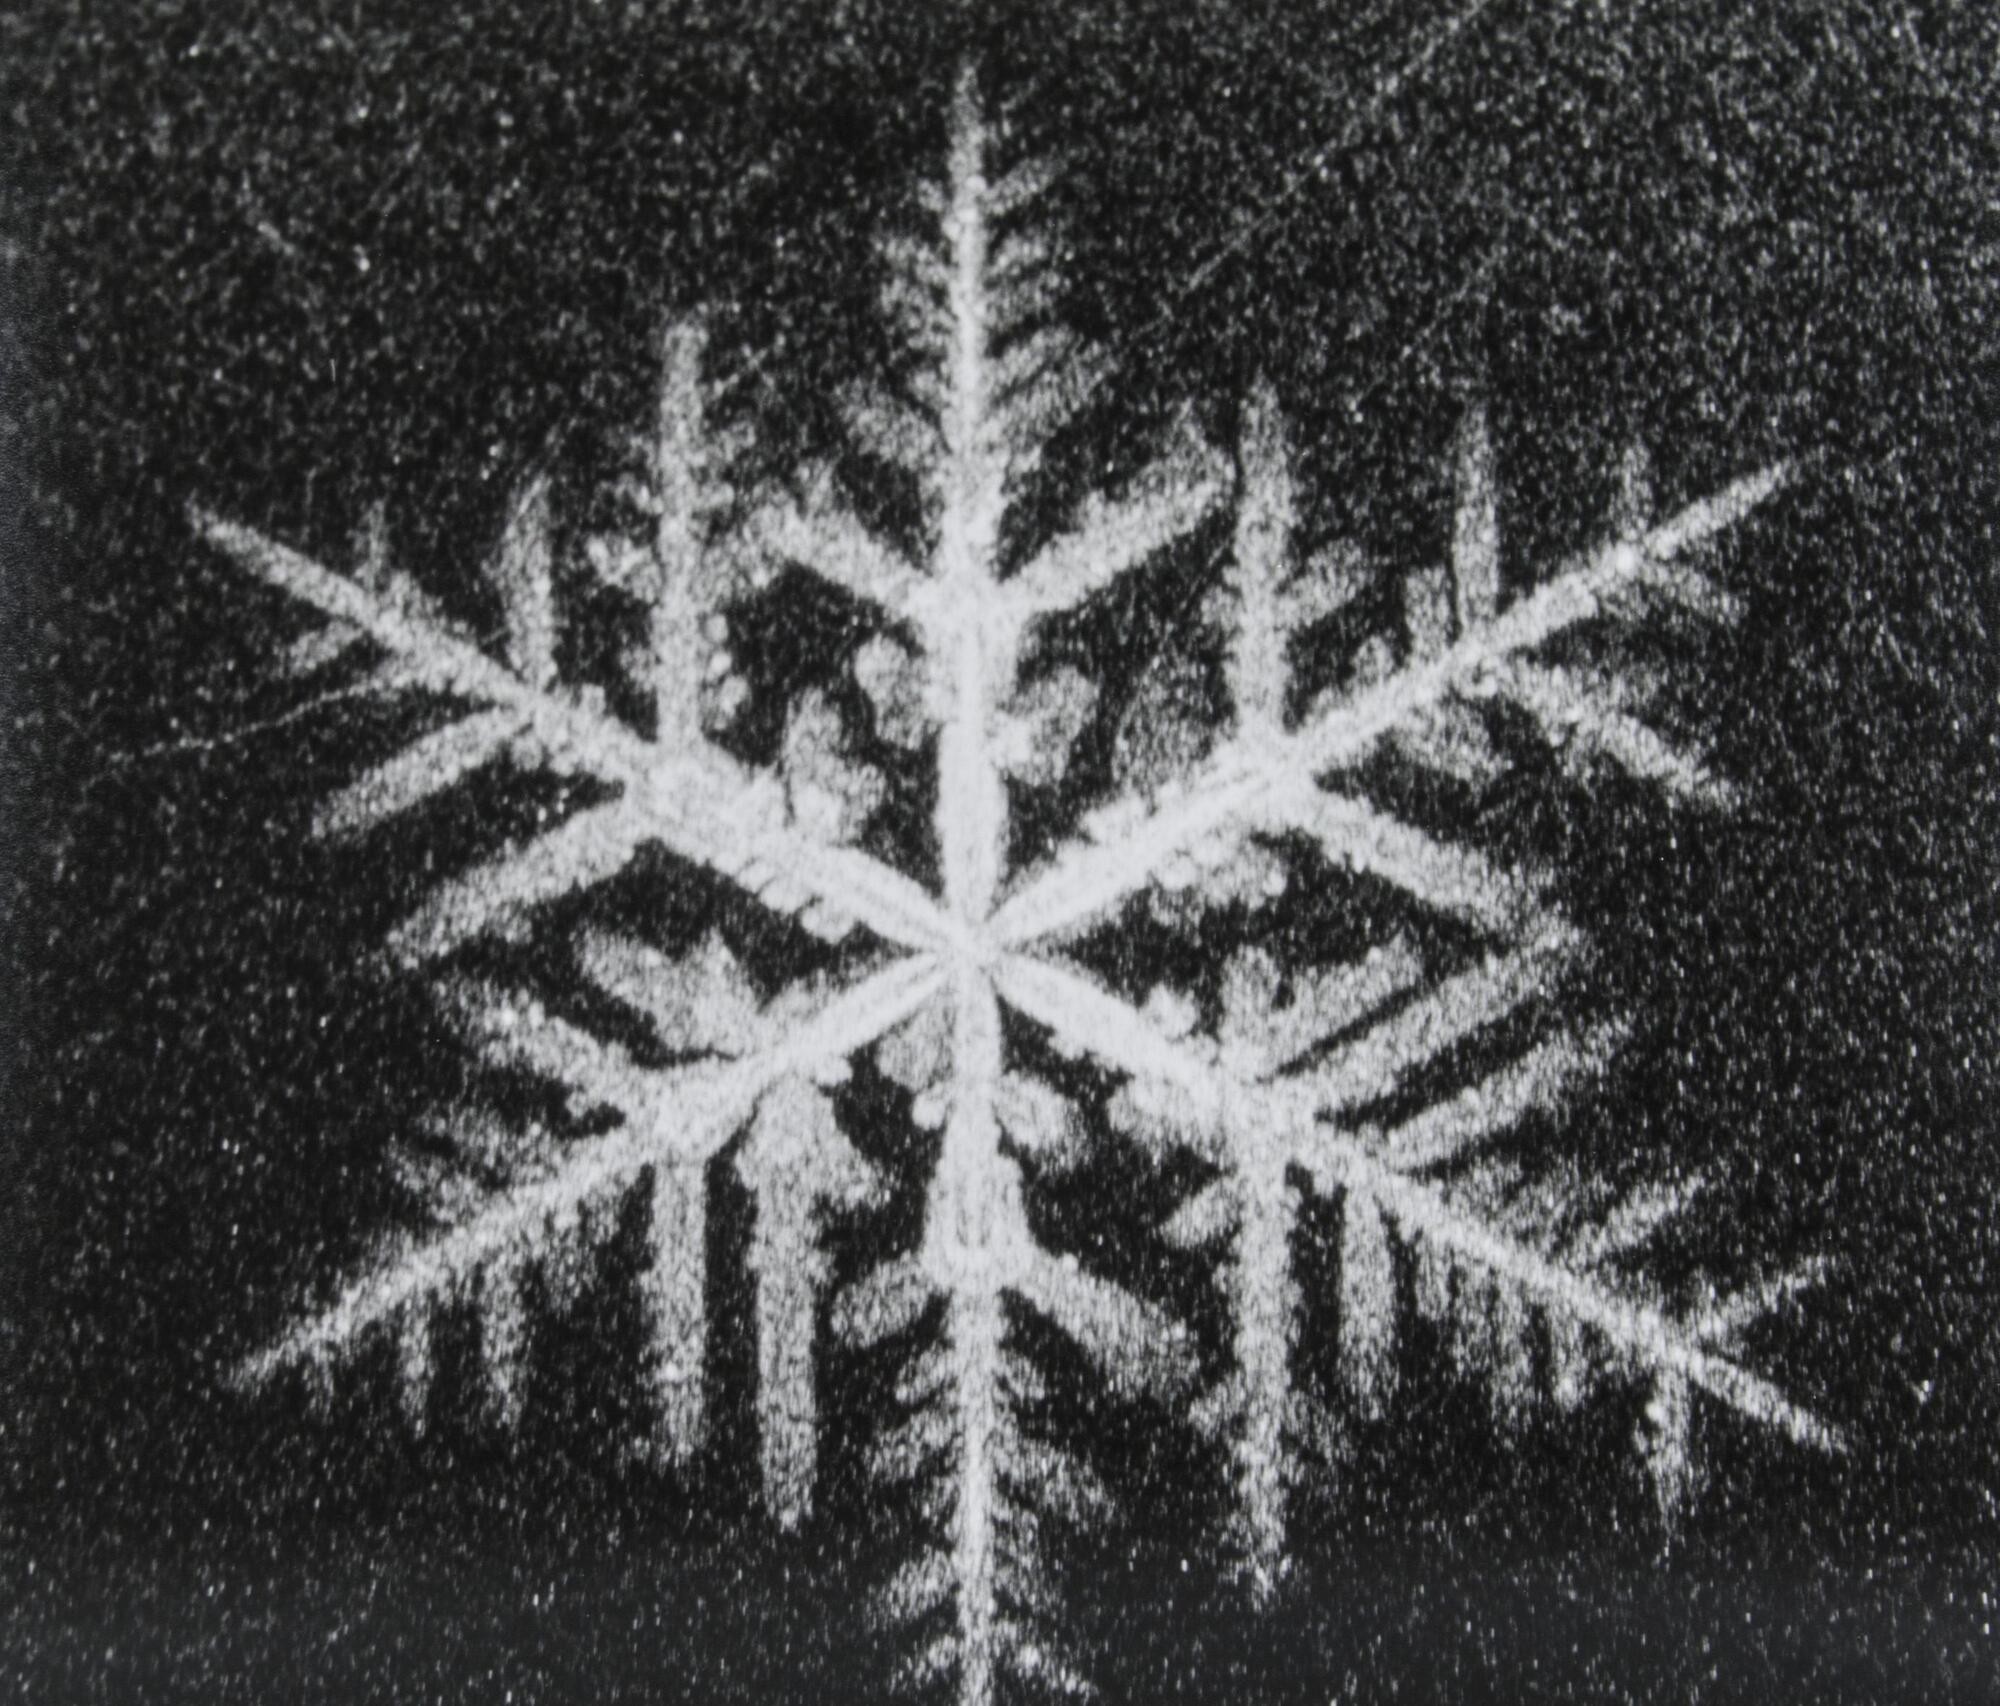 A large white snowflake on a speckled black background.